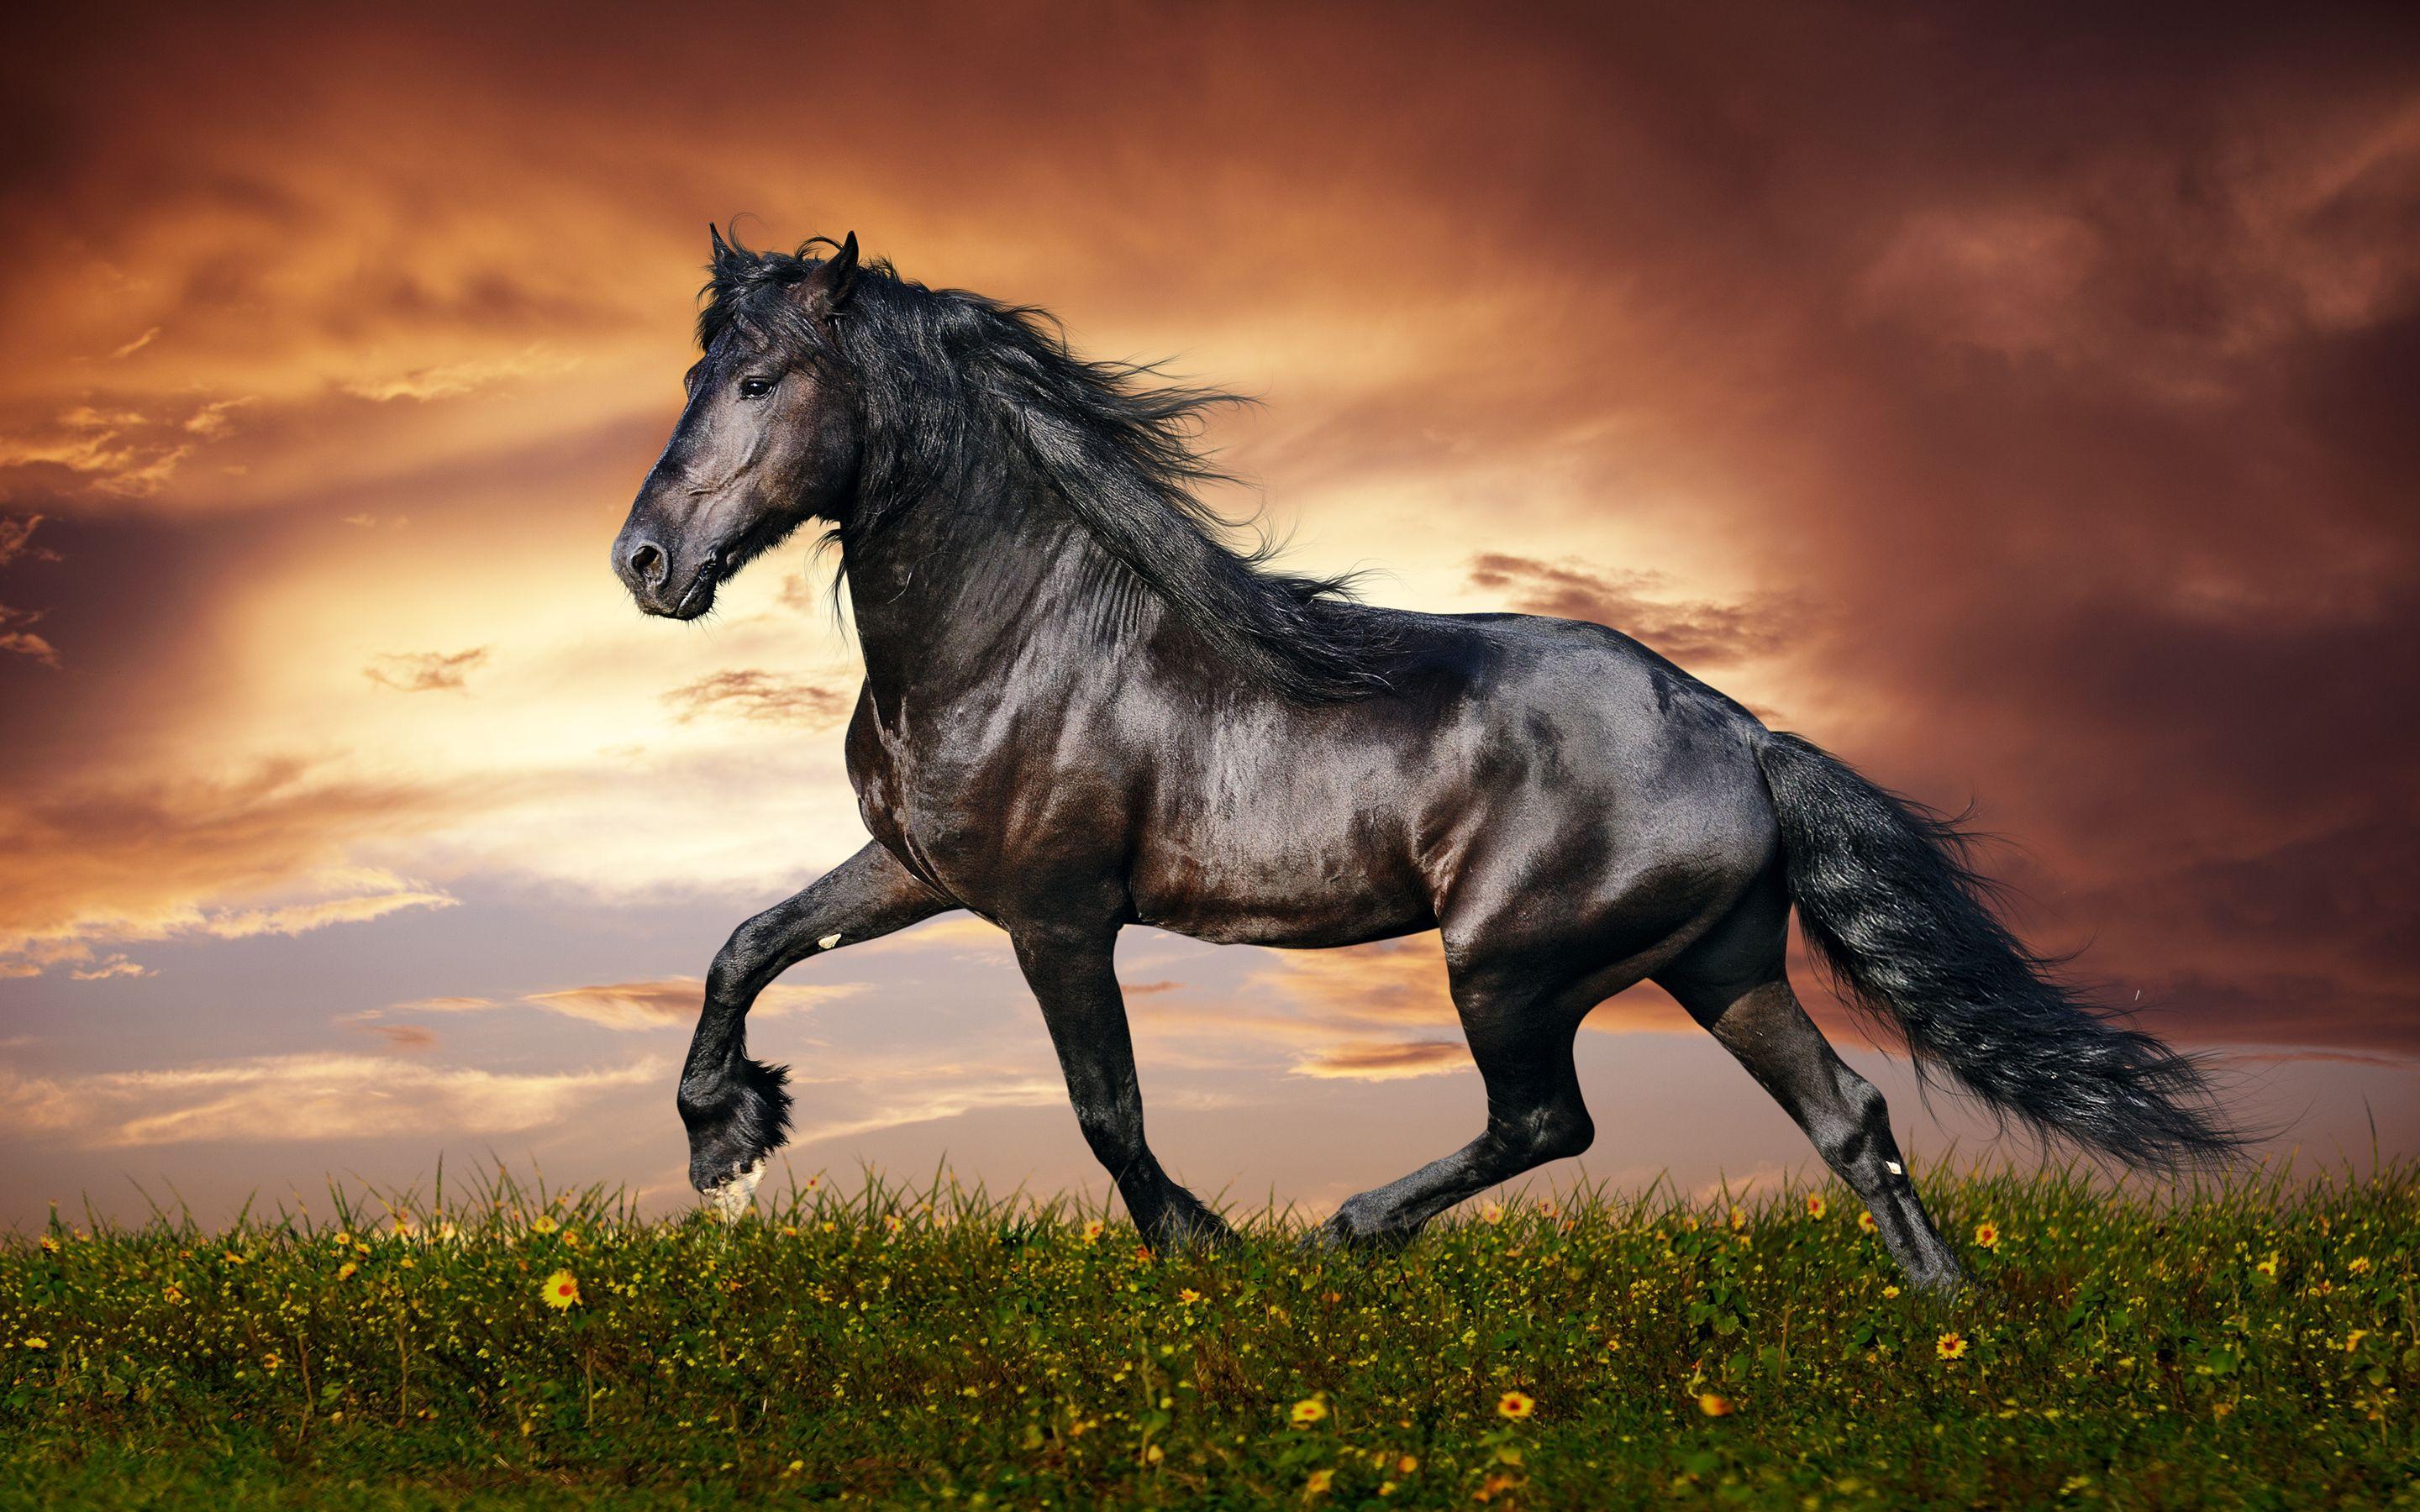 Most Beautiful Horse Picture and Image. Horses: Real